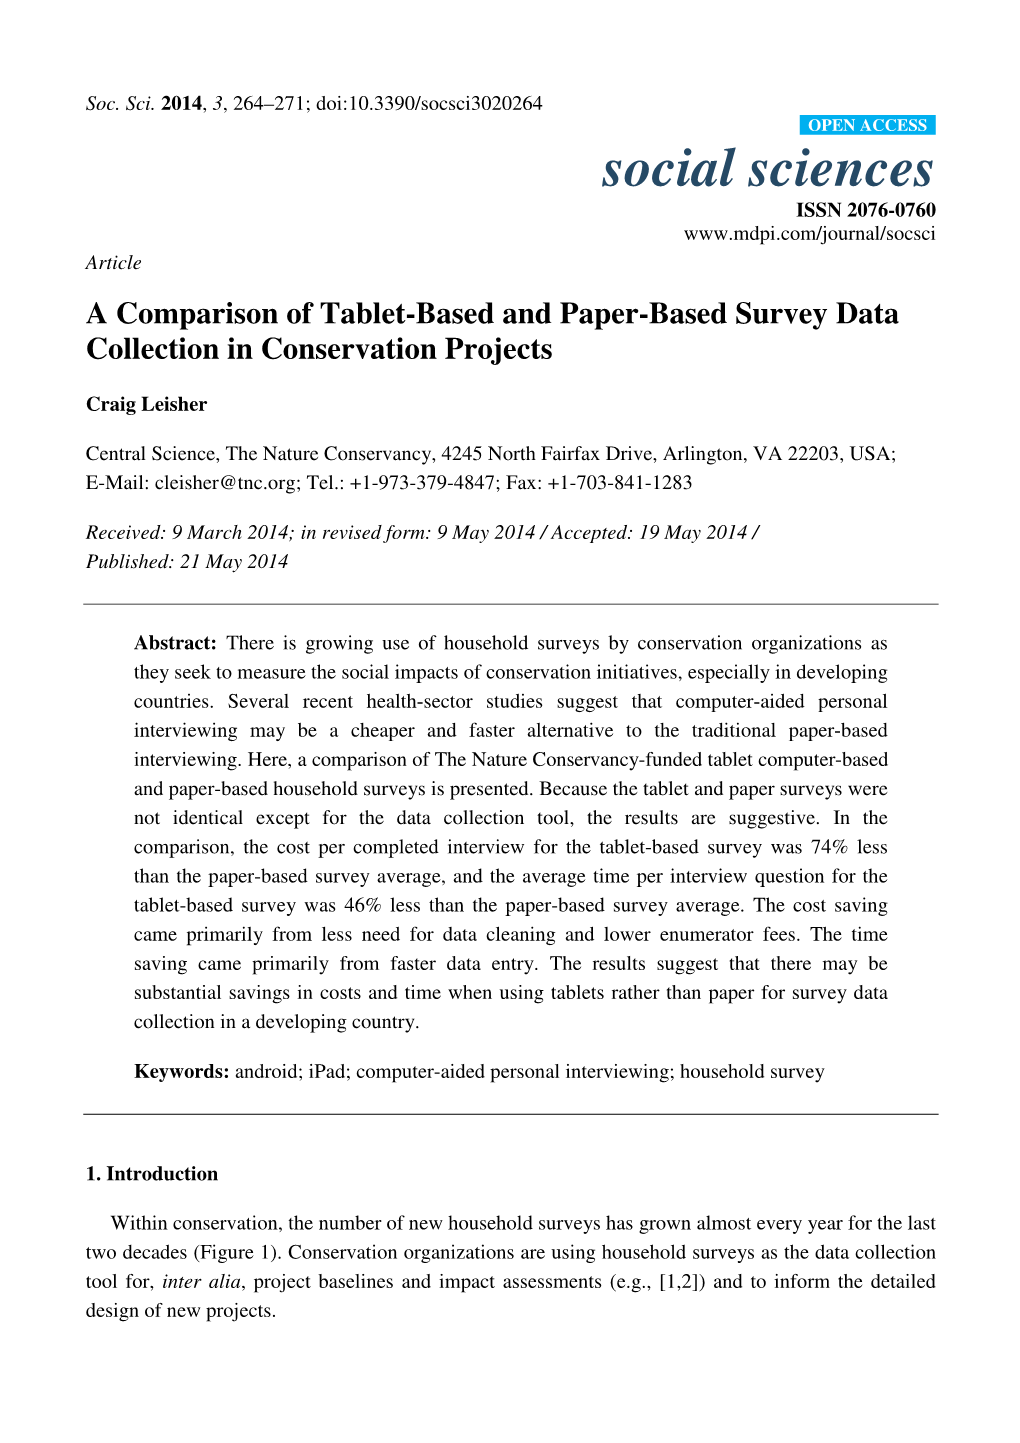 A Comparison of Tablet-Based and Paper-Based Survey Data Collection in Conservation Projects